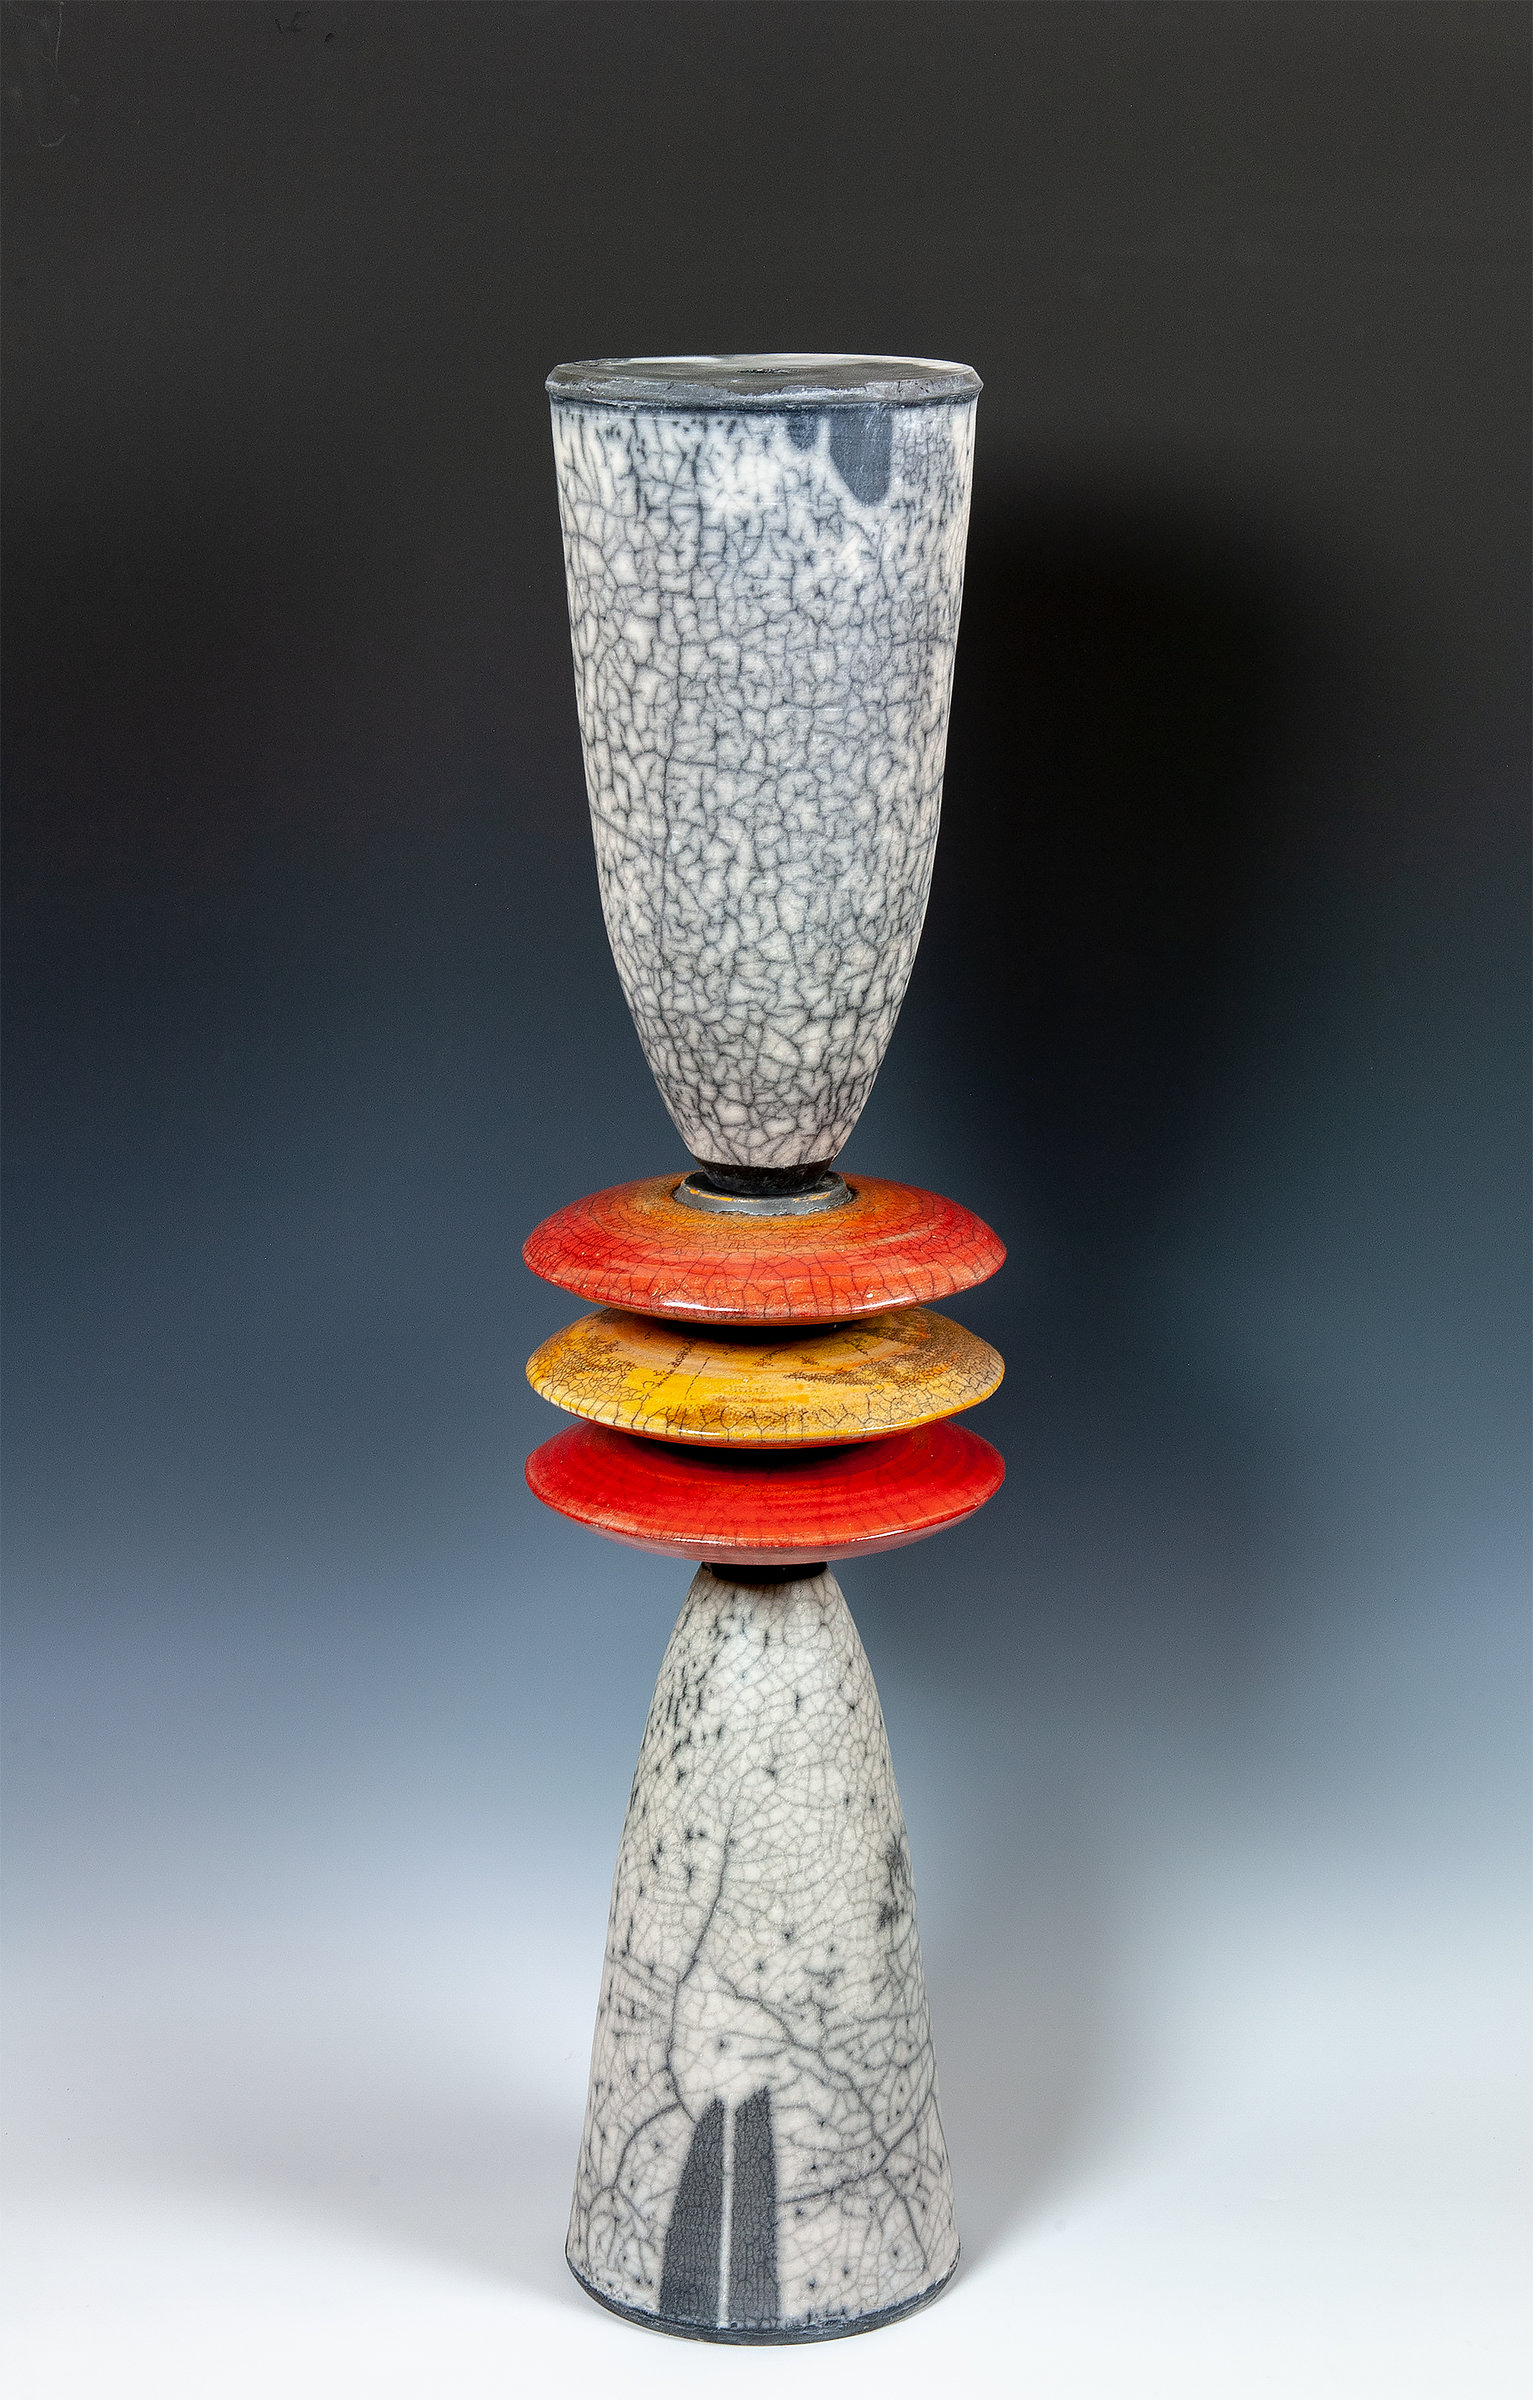 Naked Raku Cone Stack With Red And Orange Disks By Frank My XXX Hot Girl